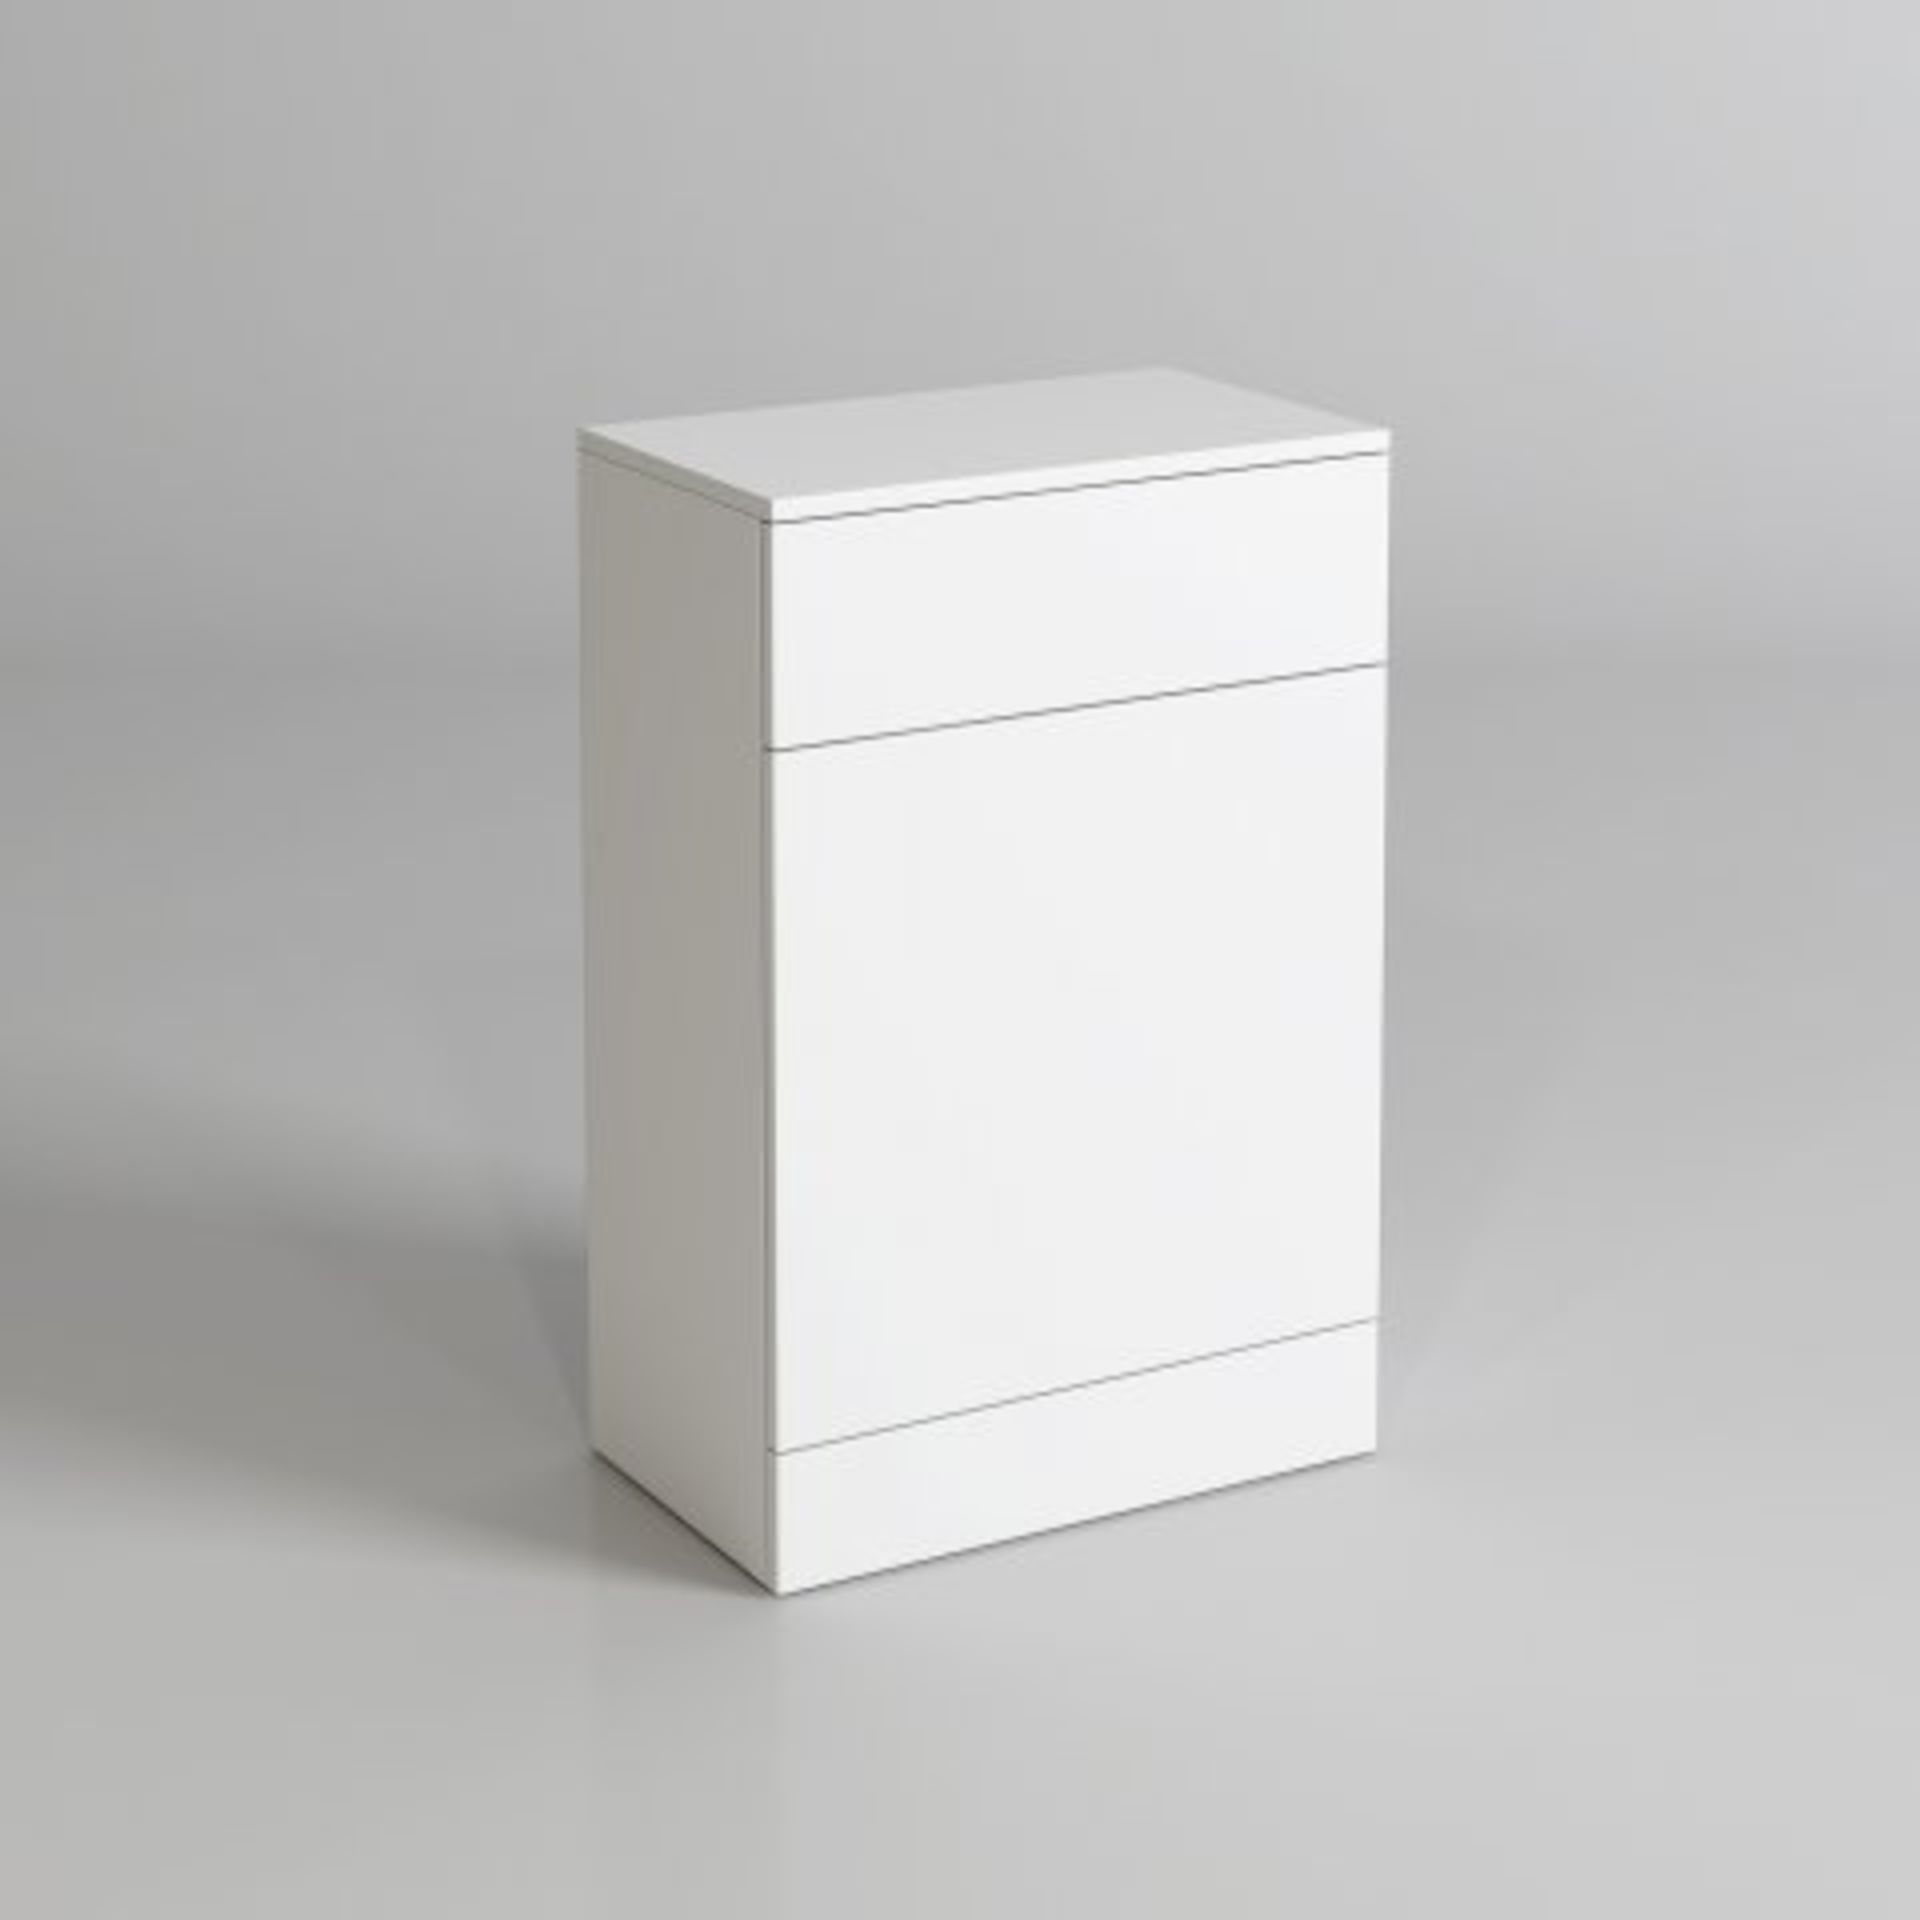 (AA314) 300mm Blanc Matte White Back To Wall Toilet Unit. RRP £124.99. This beautifully produced